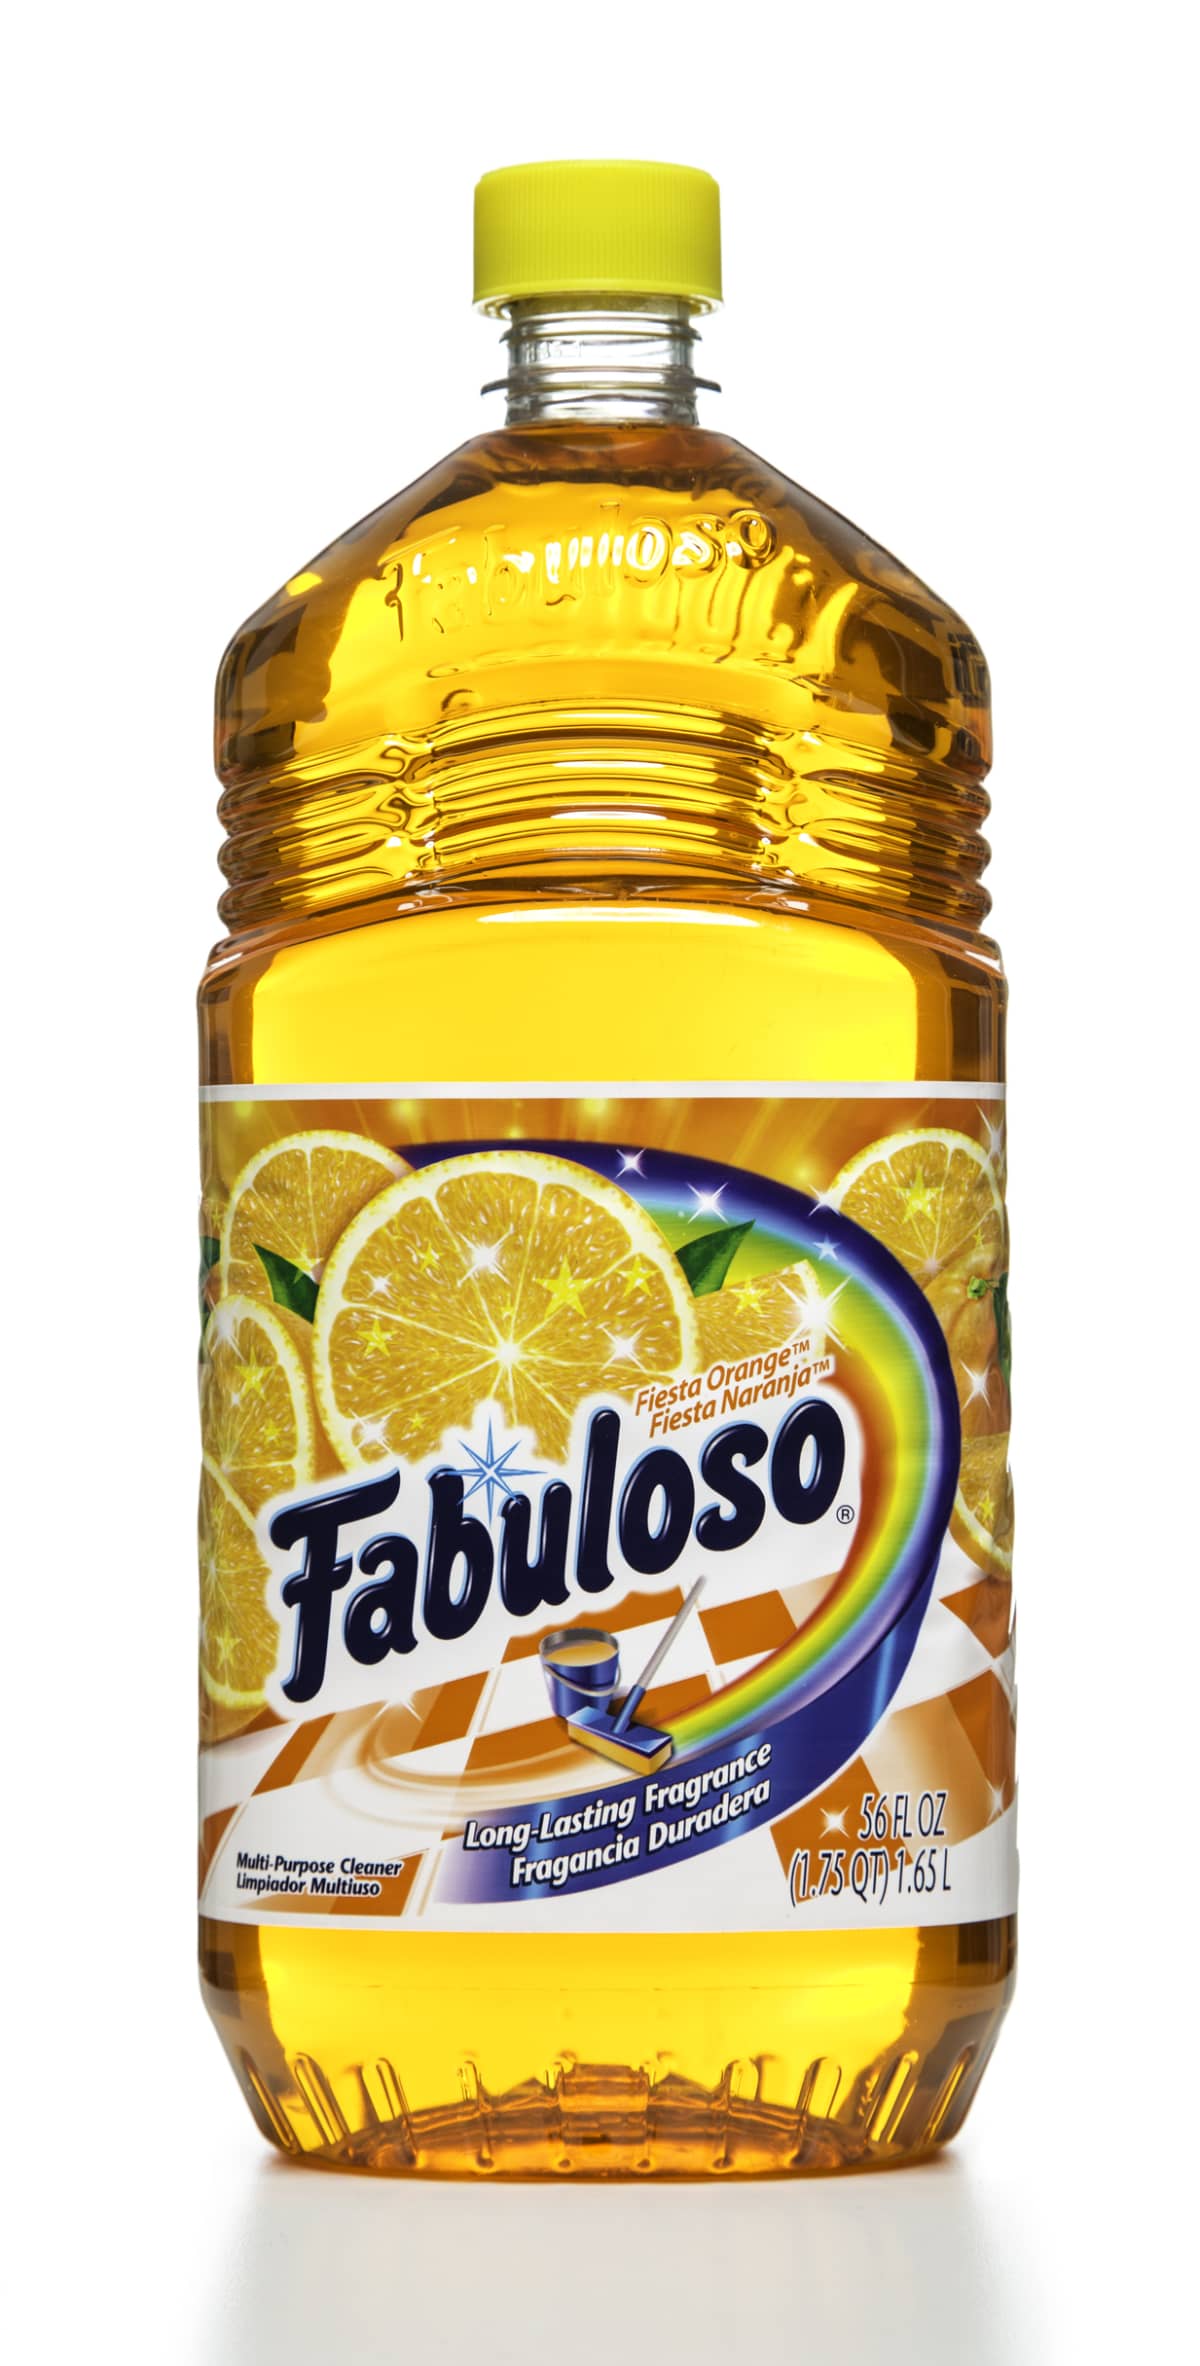 A bottle of Fabuloso